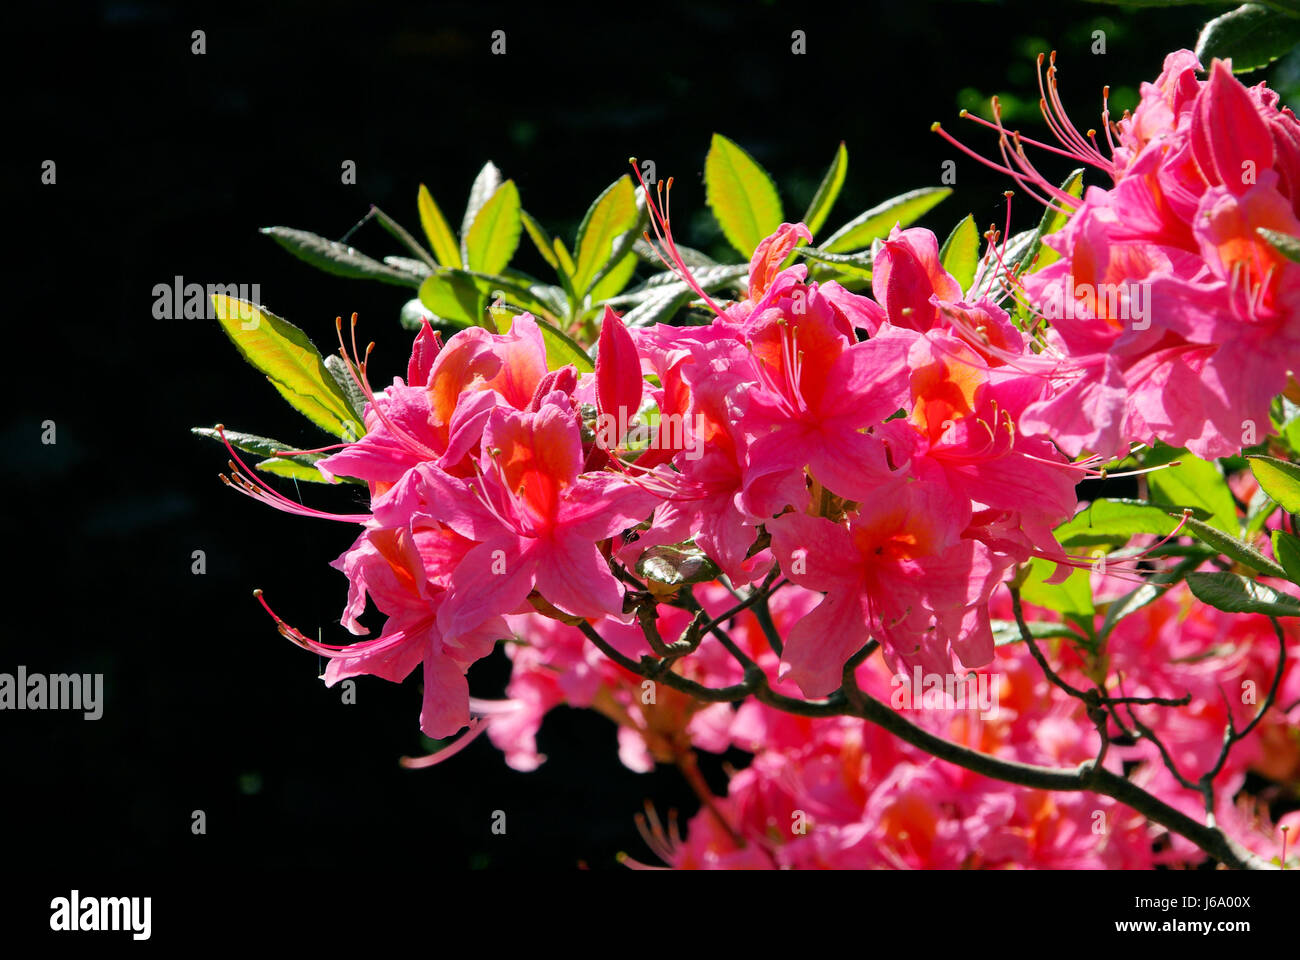 rhododendron detail isolated garden flower plant bloom blossom flourish Stock Photo